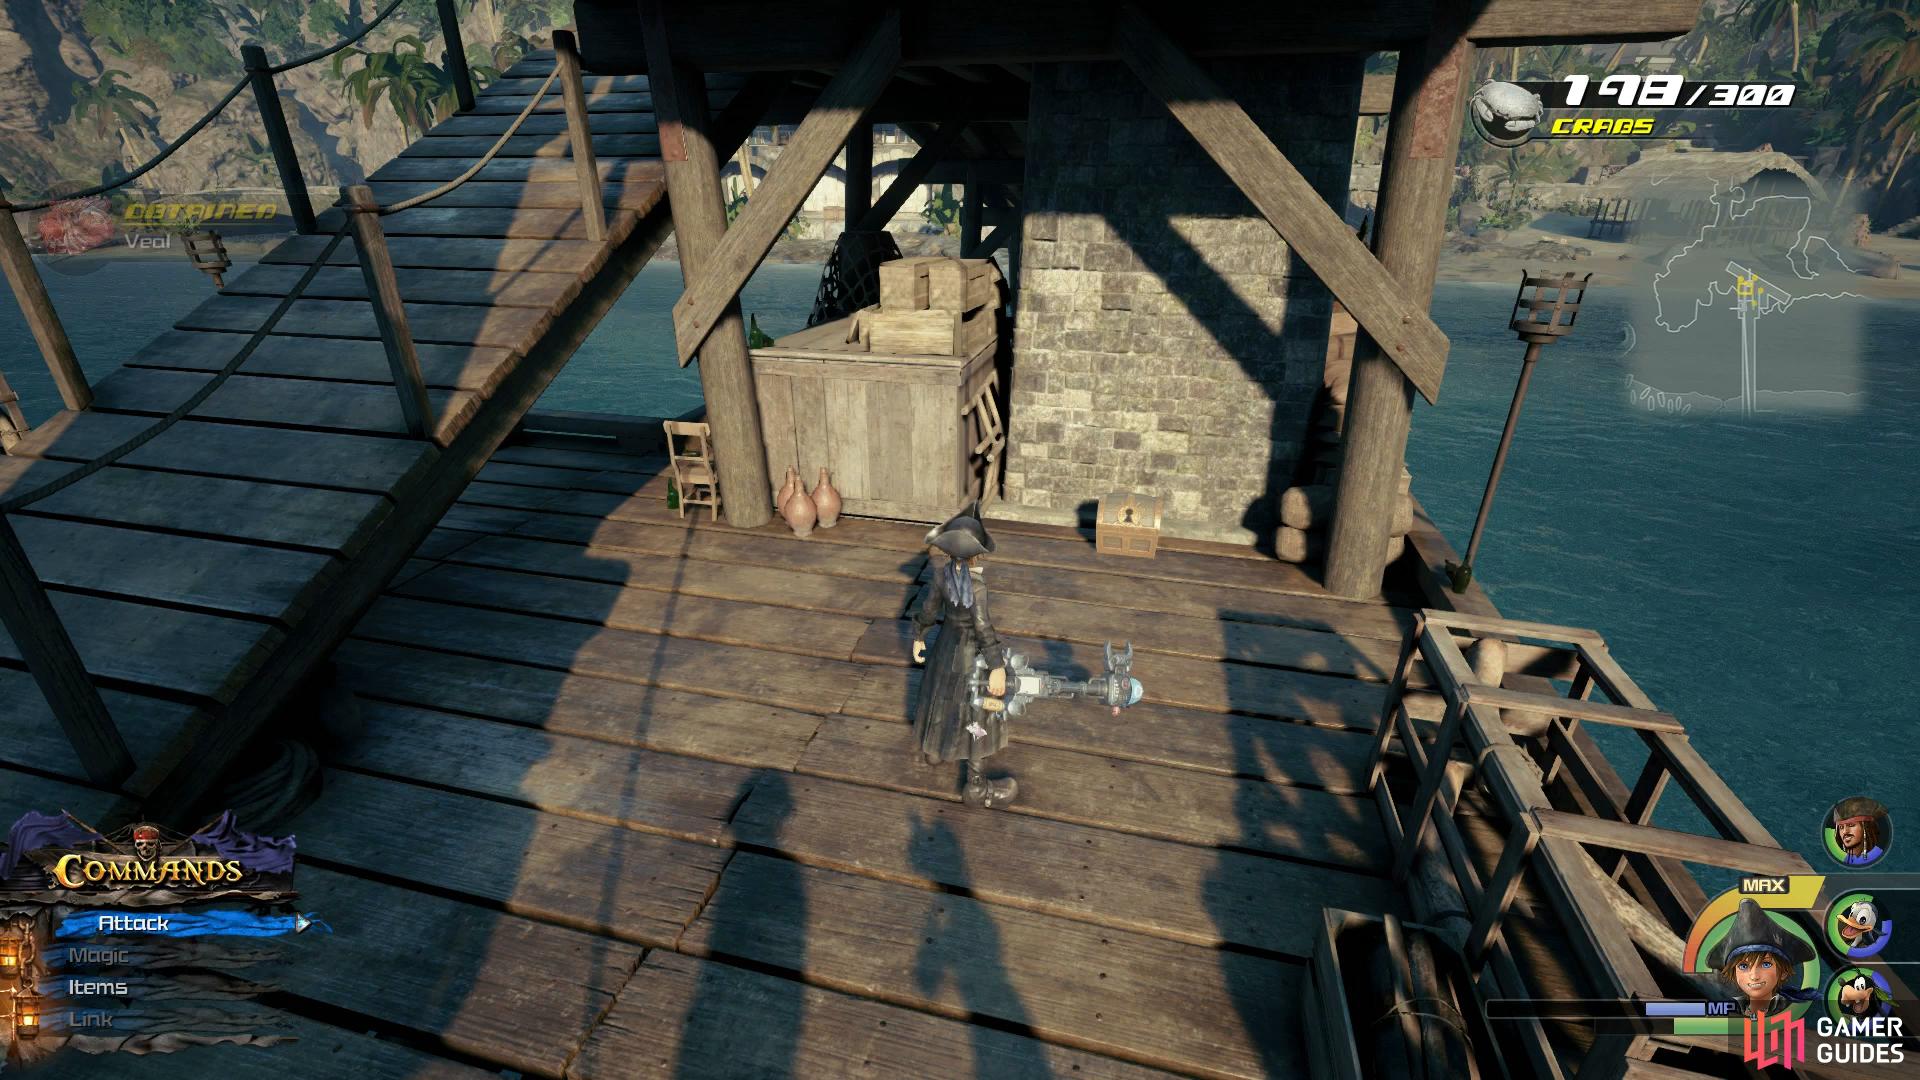 Search at the end of the pier to find this chest.